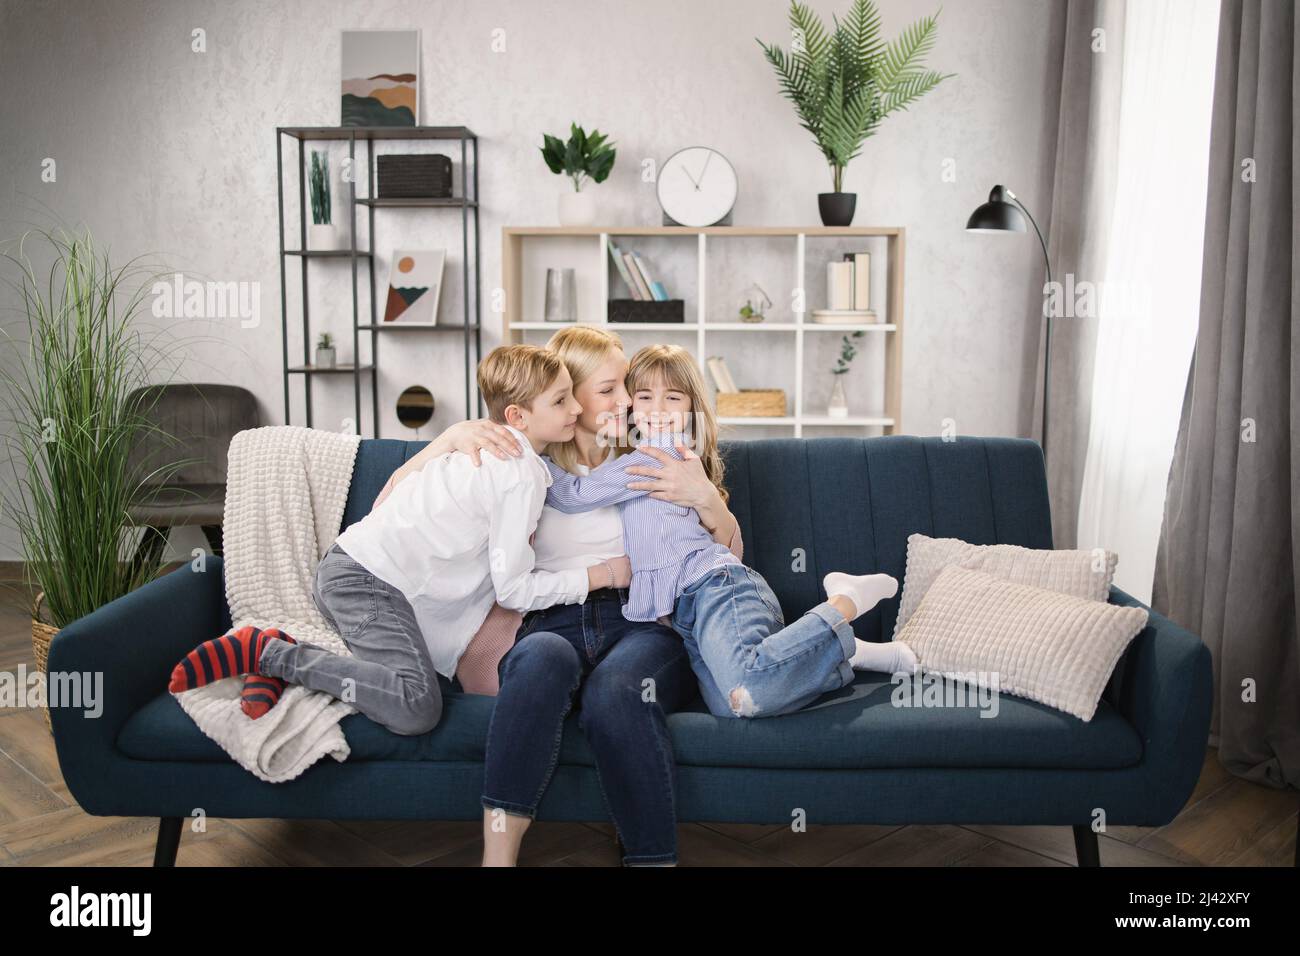 Happy little kids sit on couch hug cuddle excited young mom or nanny show  love and care, overjoyed small children relax with mother embrace share  sweet tender family moment in living room